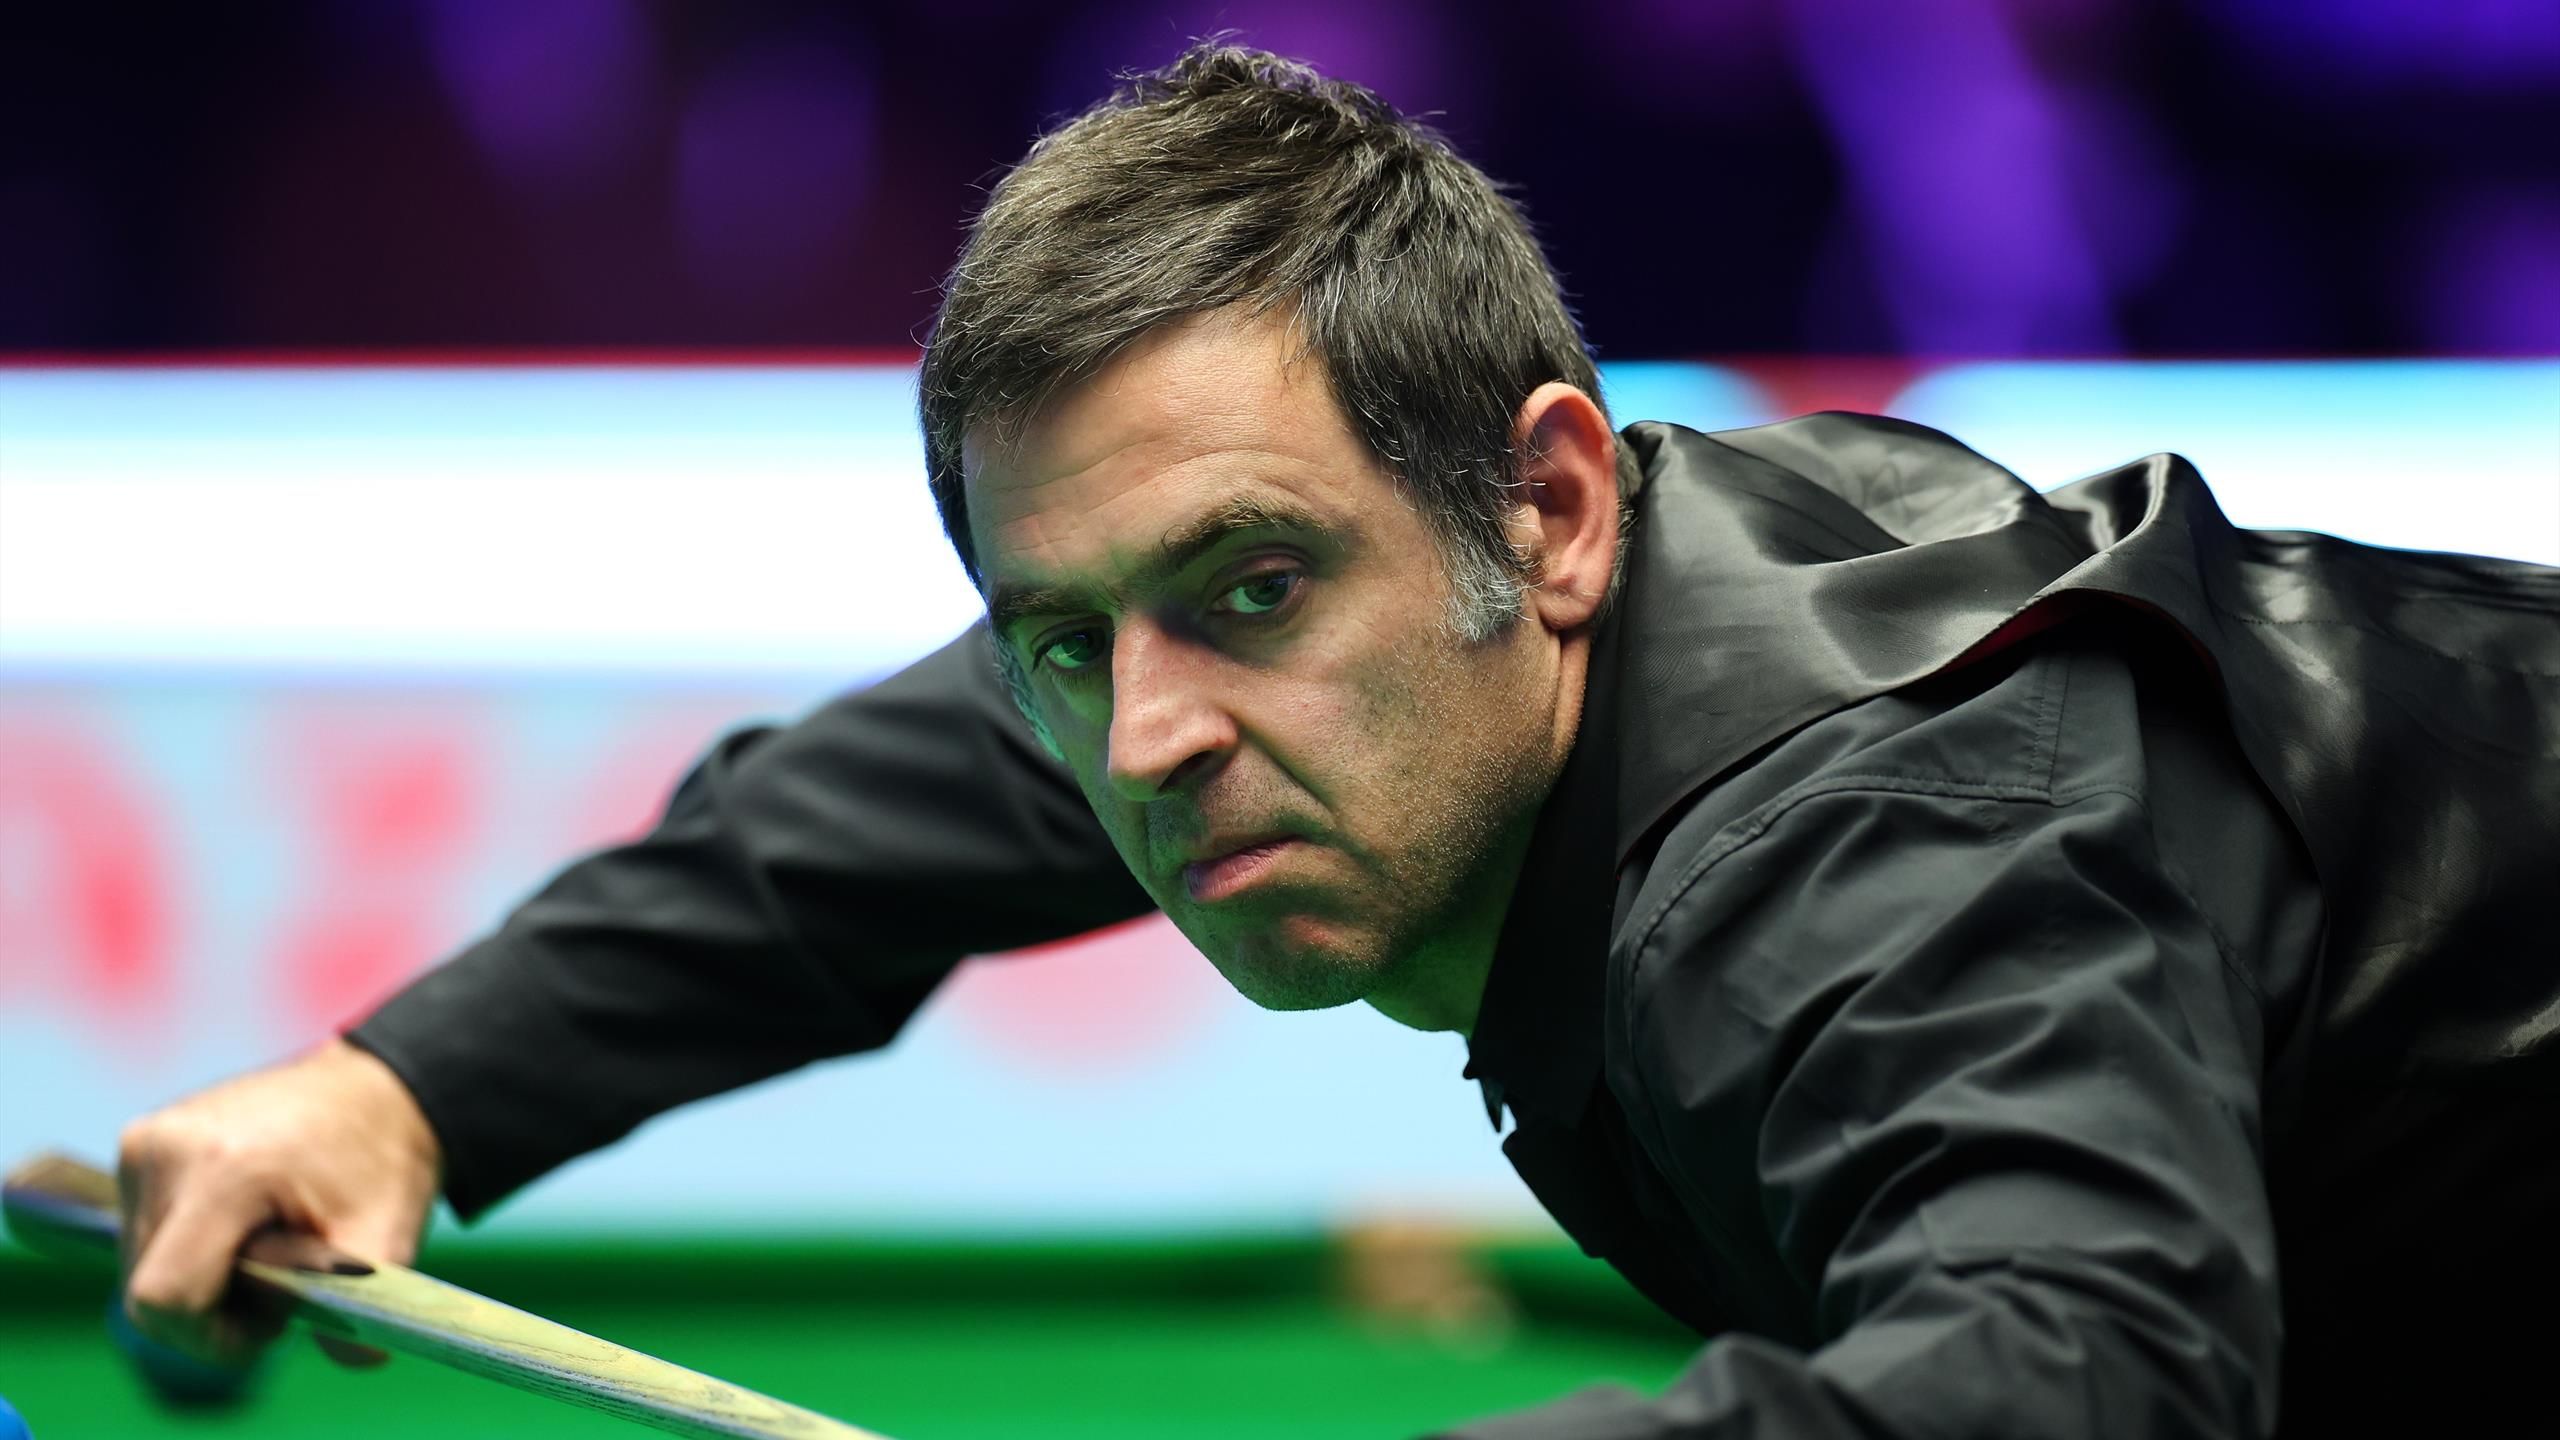 How to watch World Snooker Championship 2023 Live stream, TV coverage details with Ronnie OSullivan in action